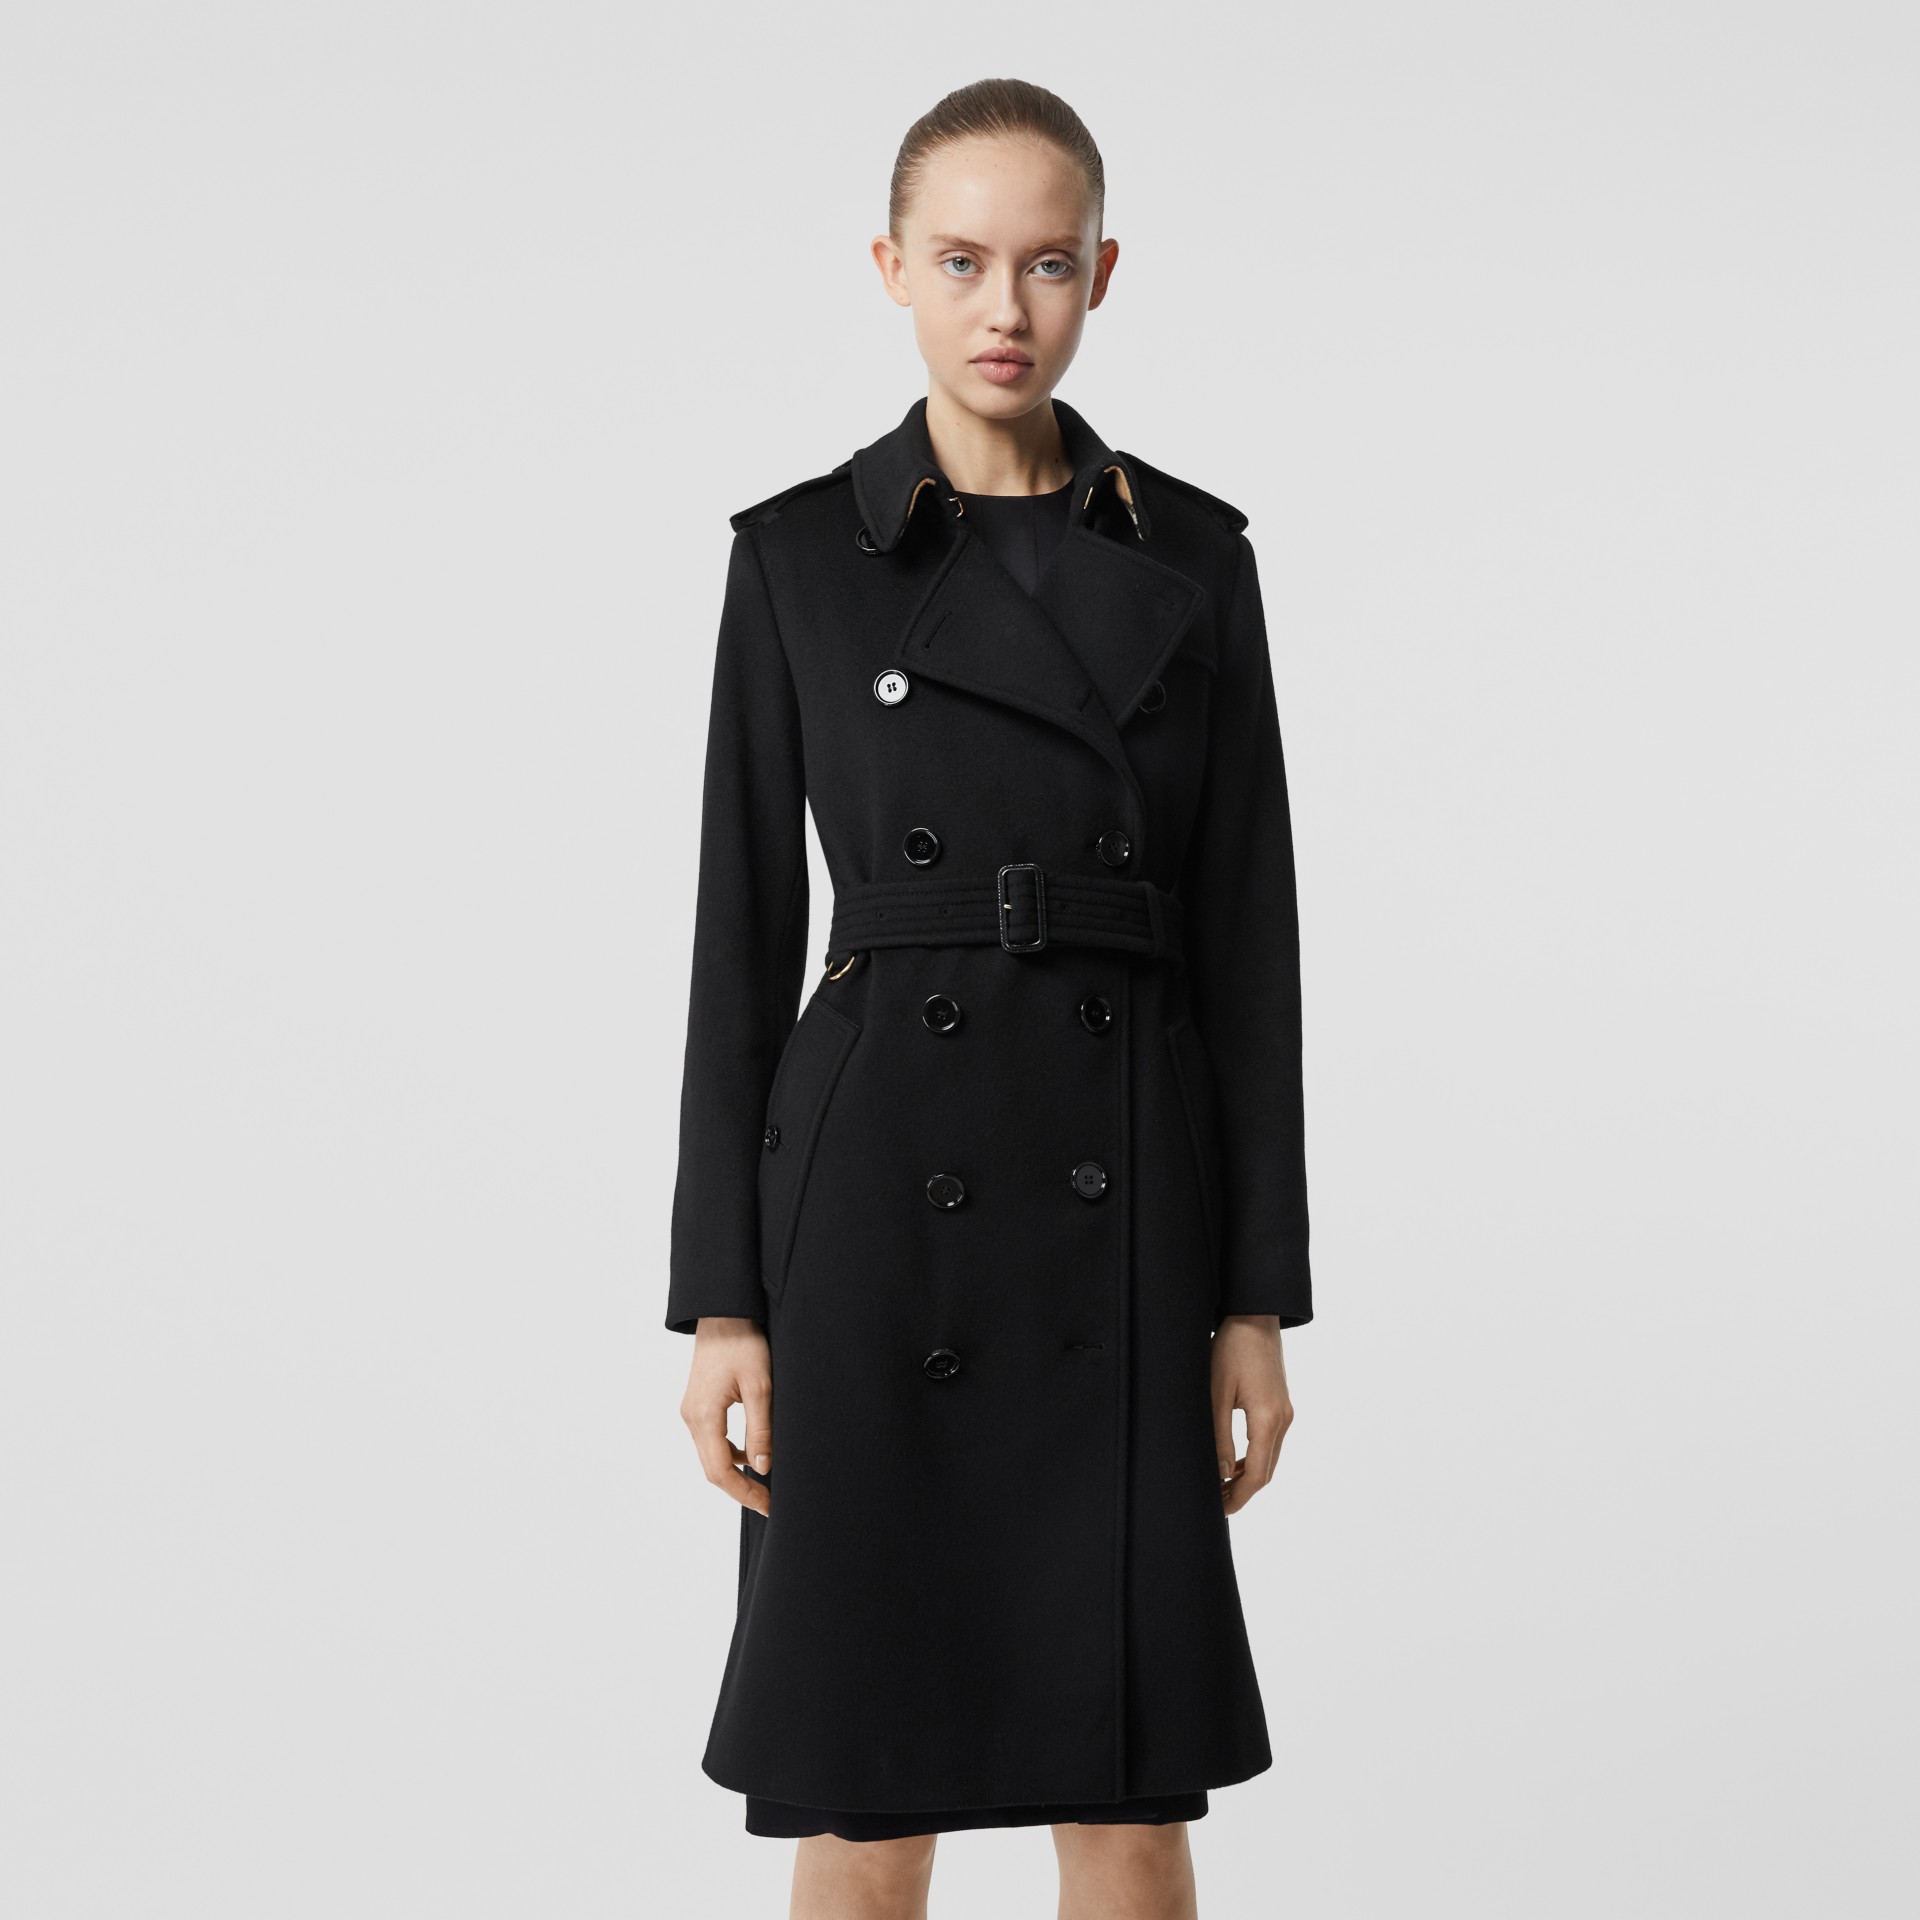 Cashmere Trench Coat in Black - Women | Burberry United States